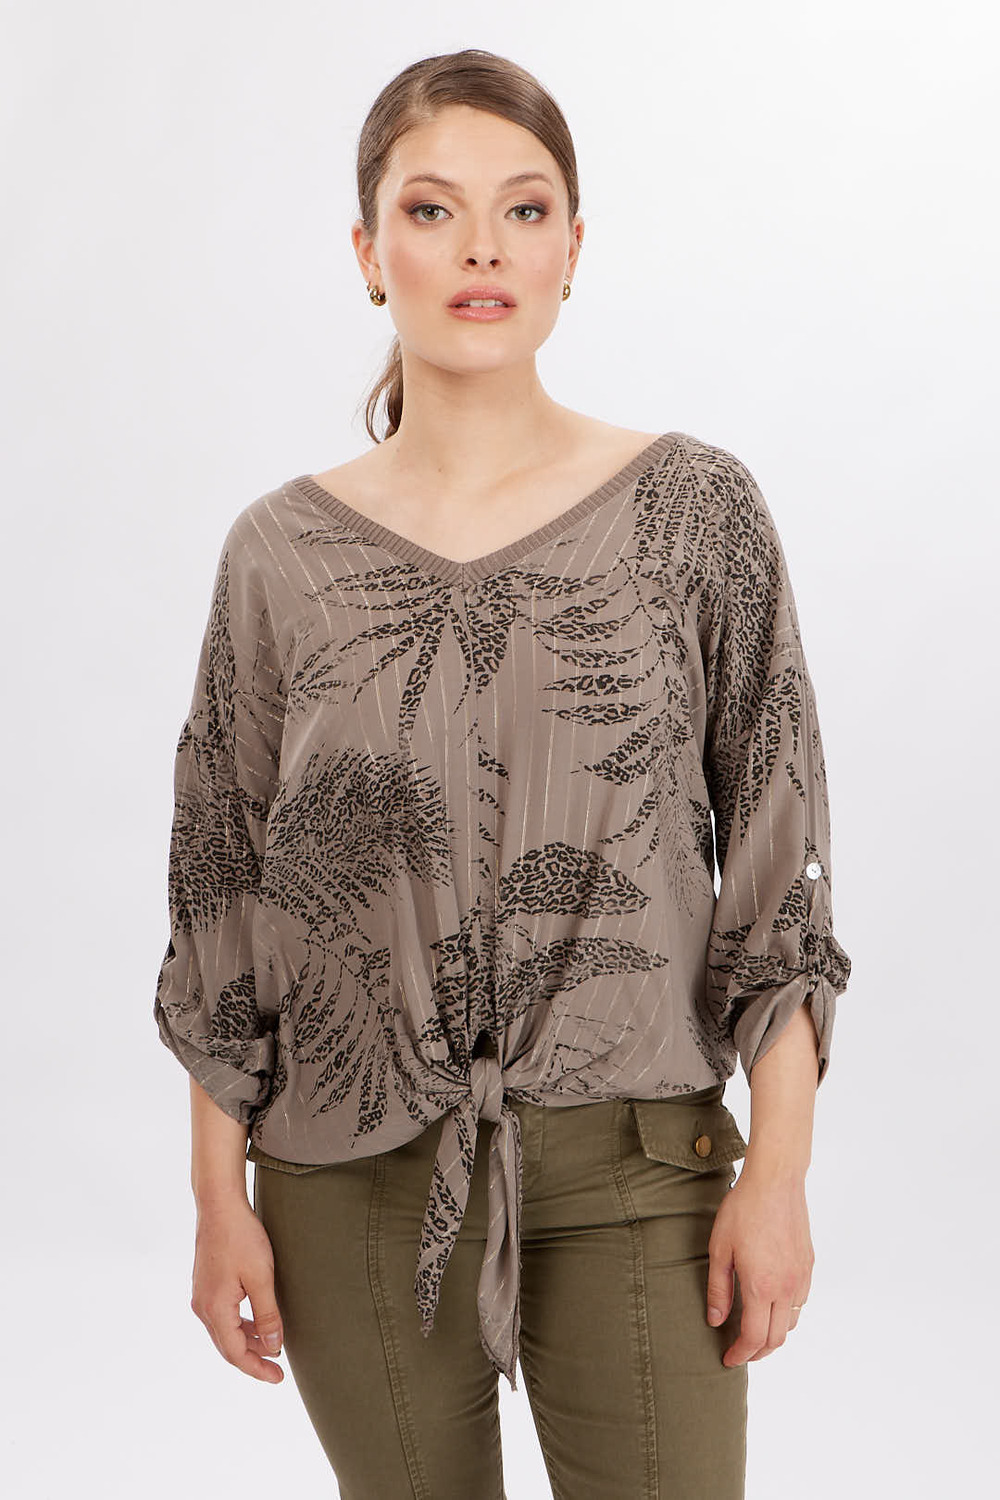 Printed Tie-Front Top Style 702-03. Mocha